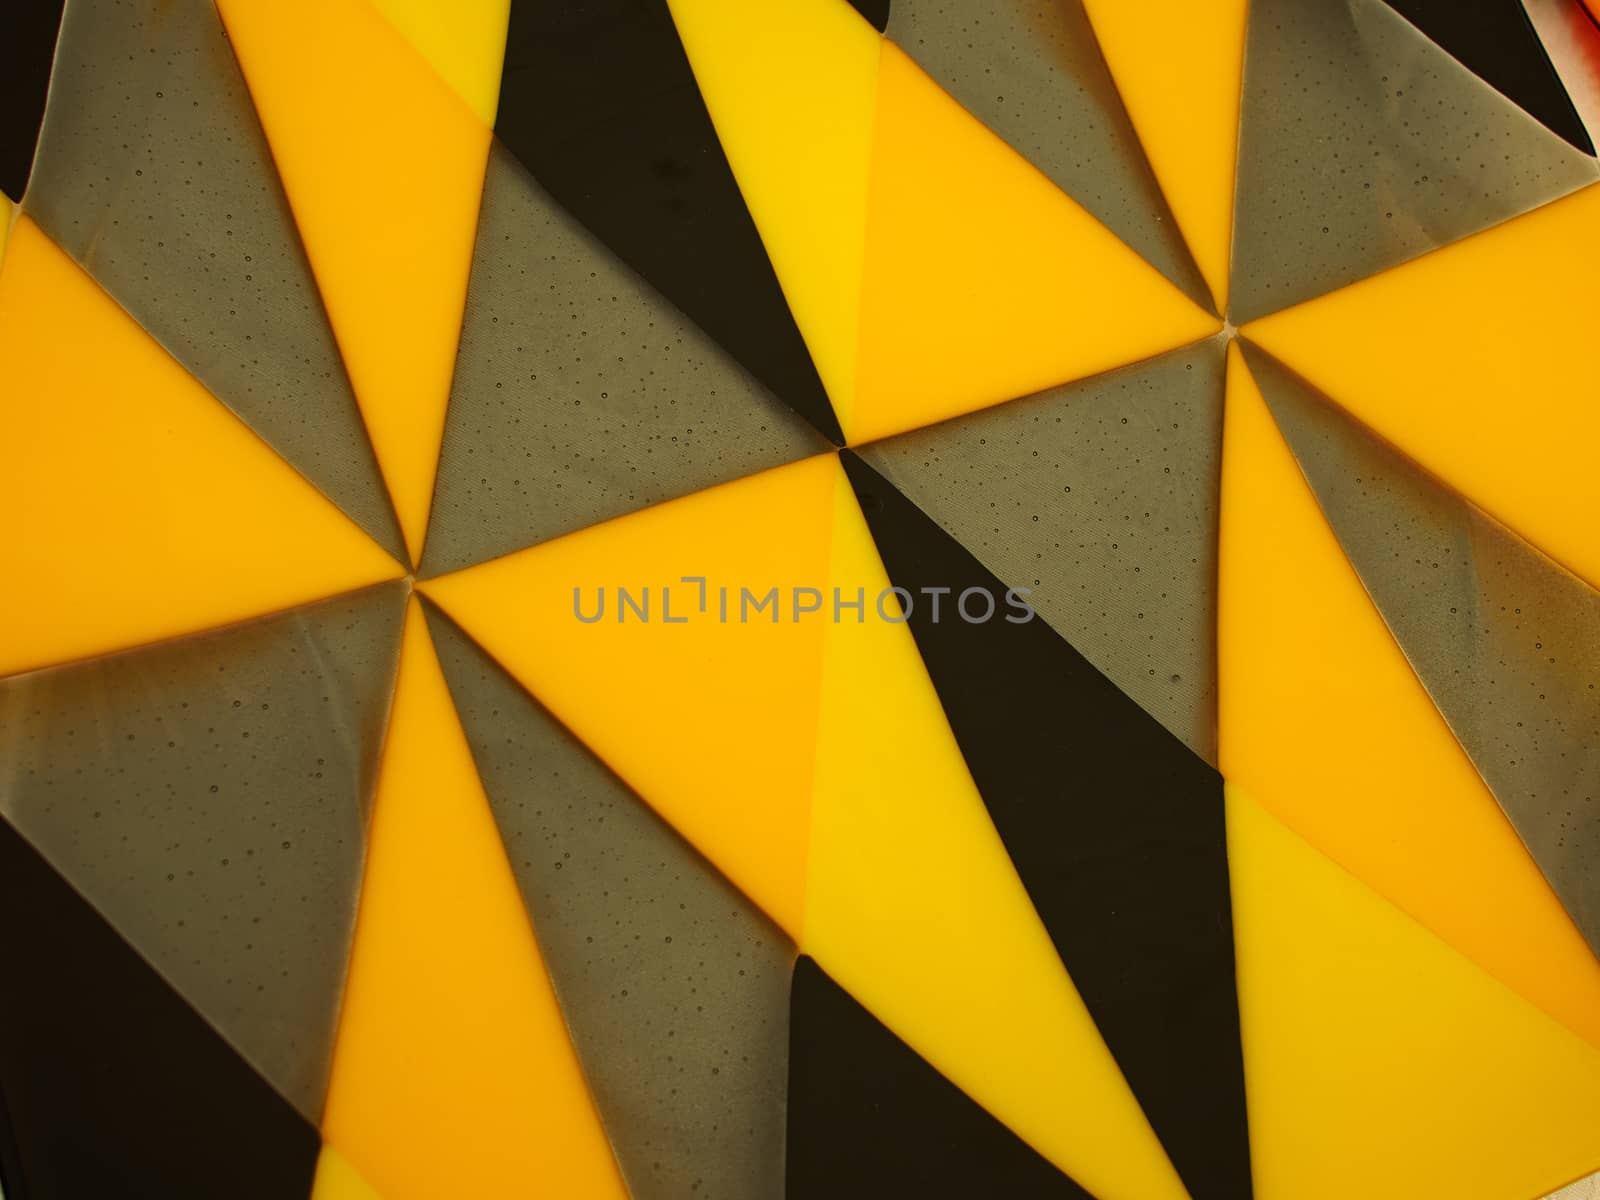 Colored glass texture abstract background yellow and black by Ronyzmbow